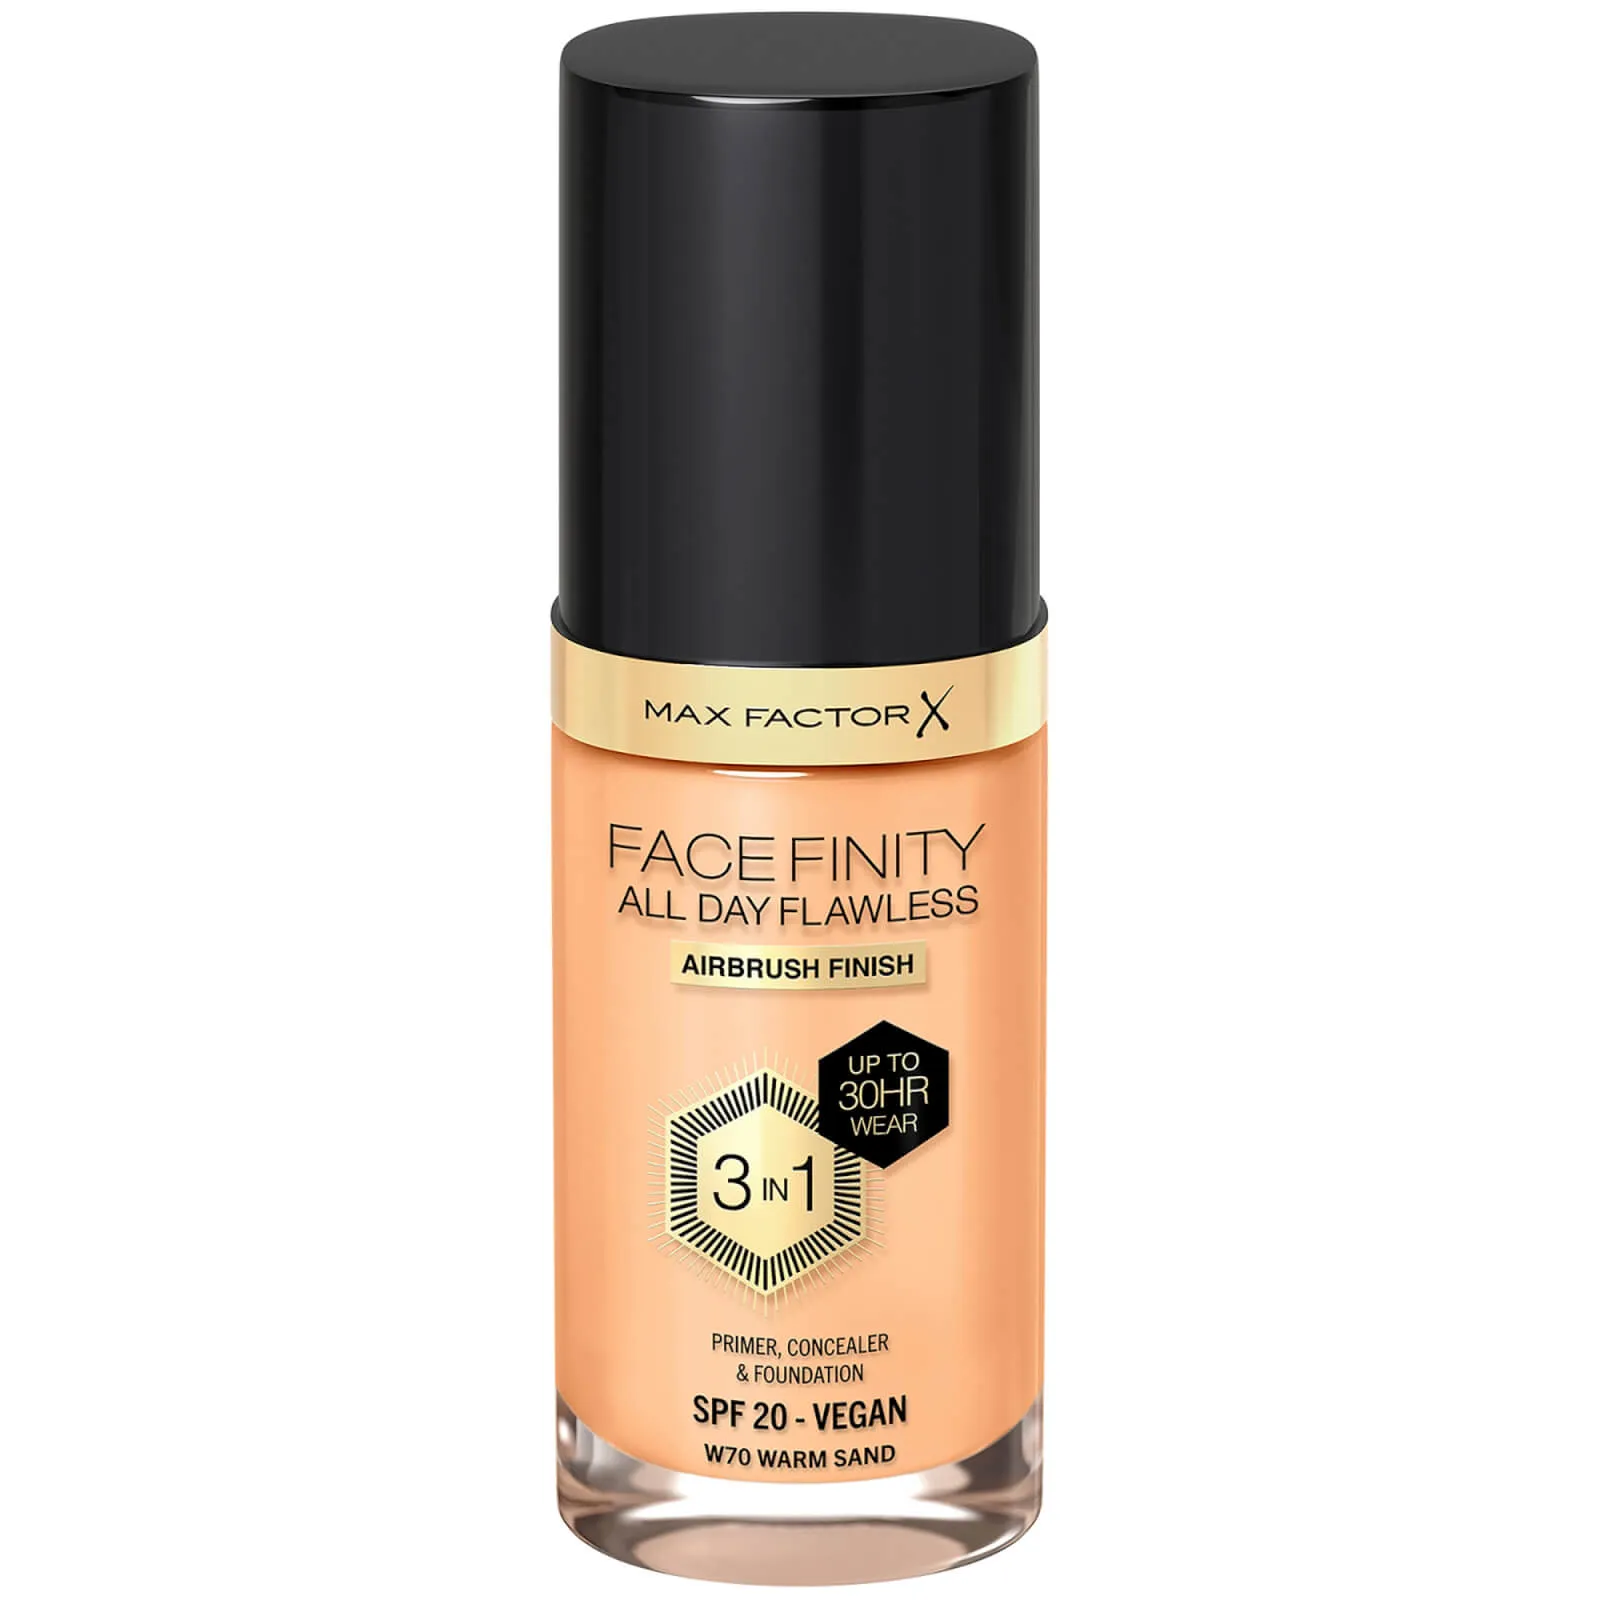  Facefinity All Day Flawless 3 in 1 Vegan Foundation 30ml (Various Shades) - W70 - WARM SAND